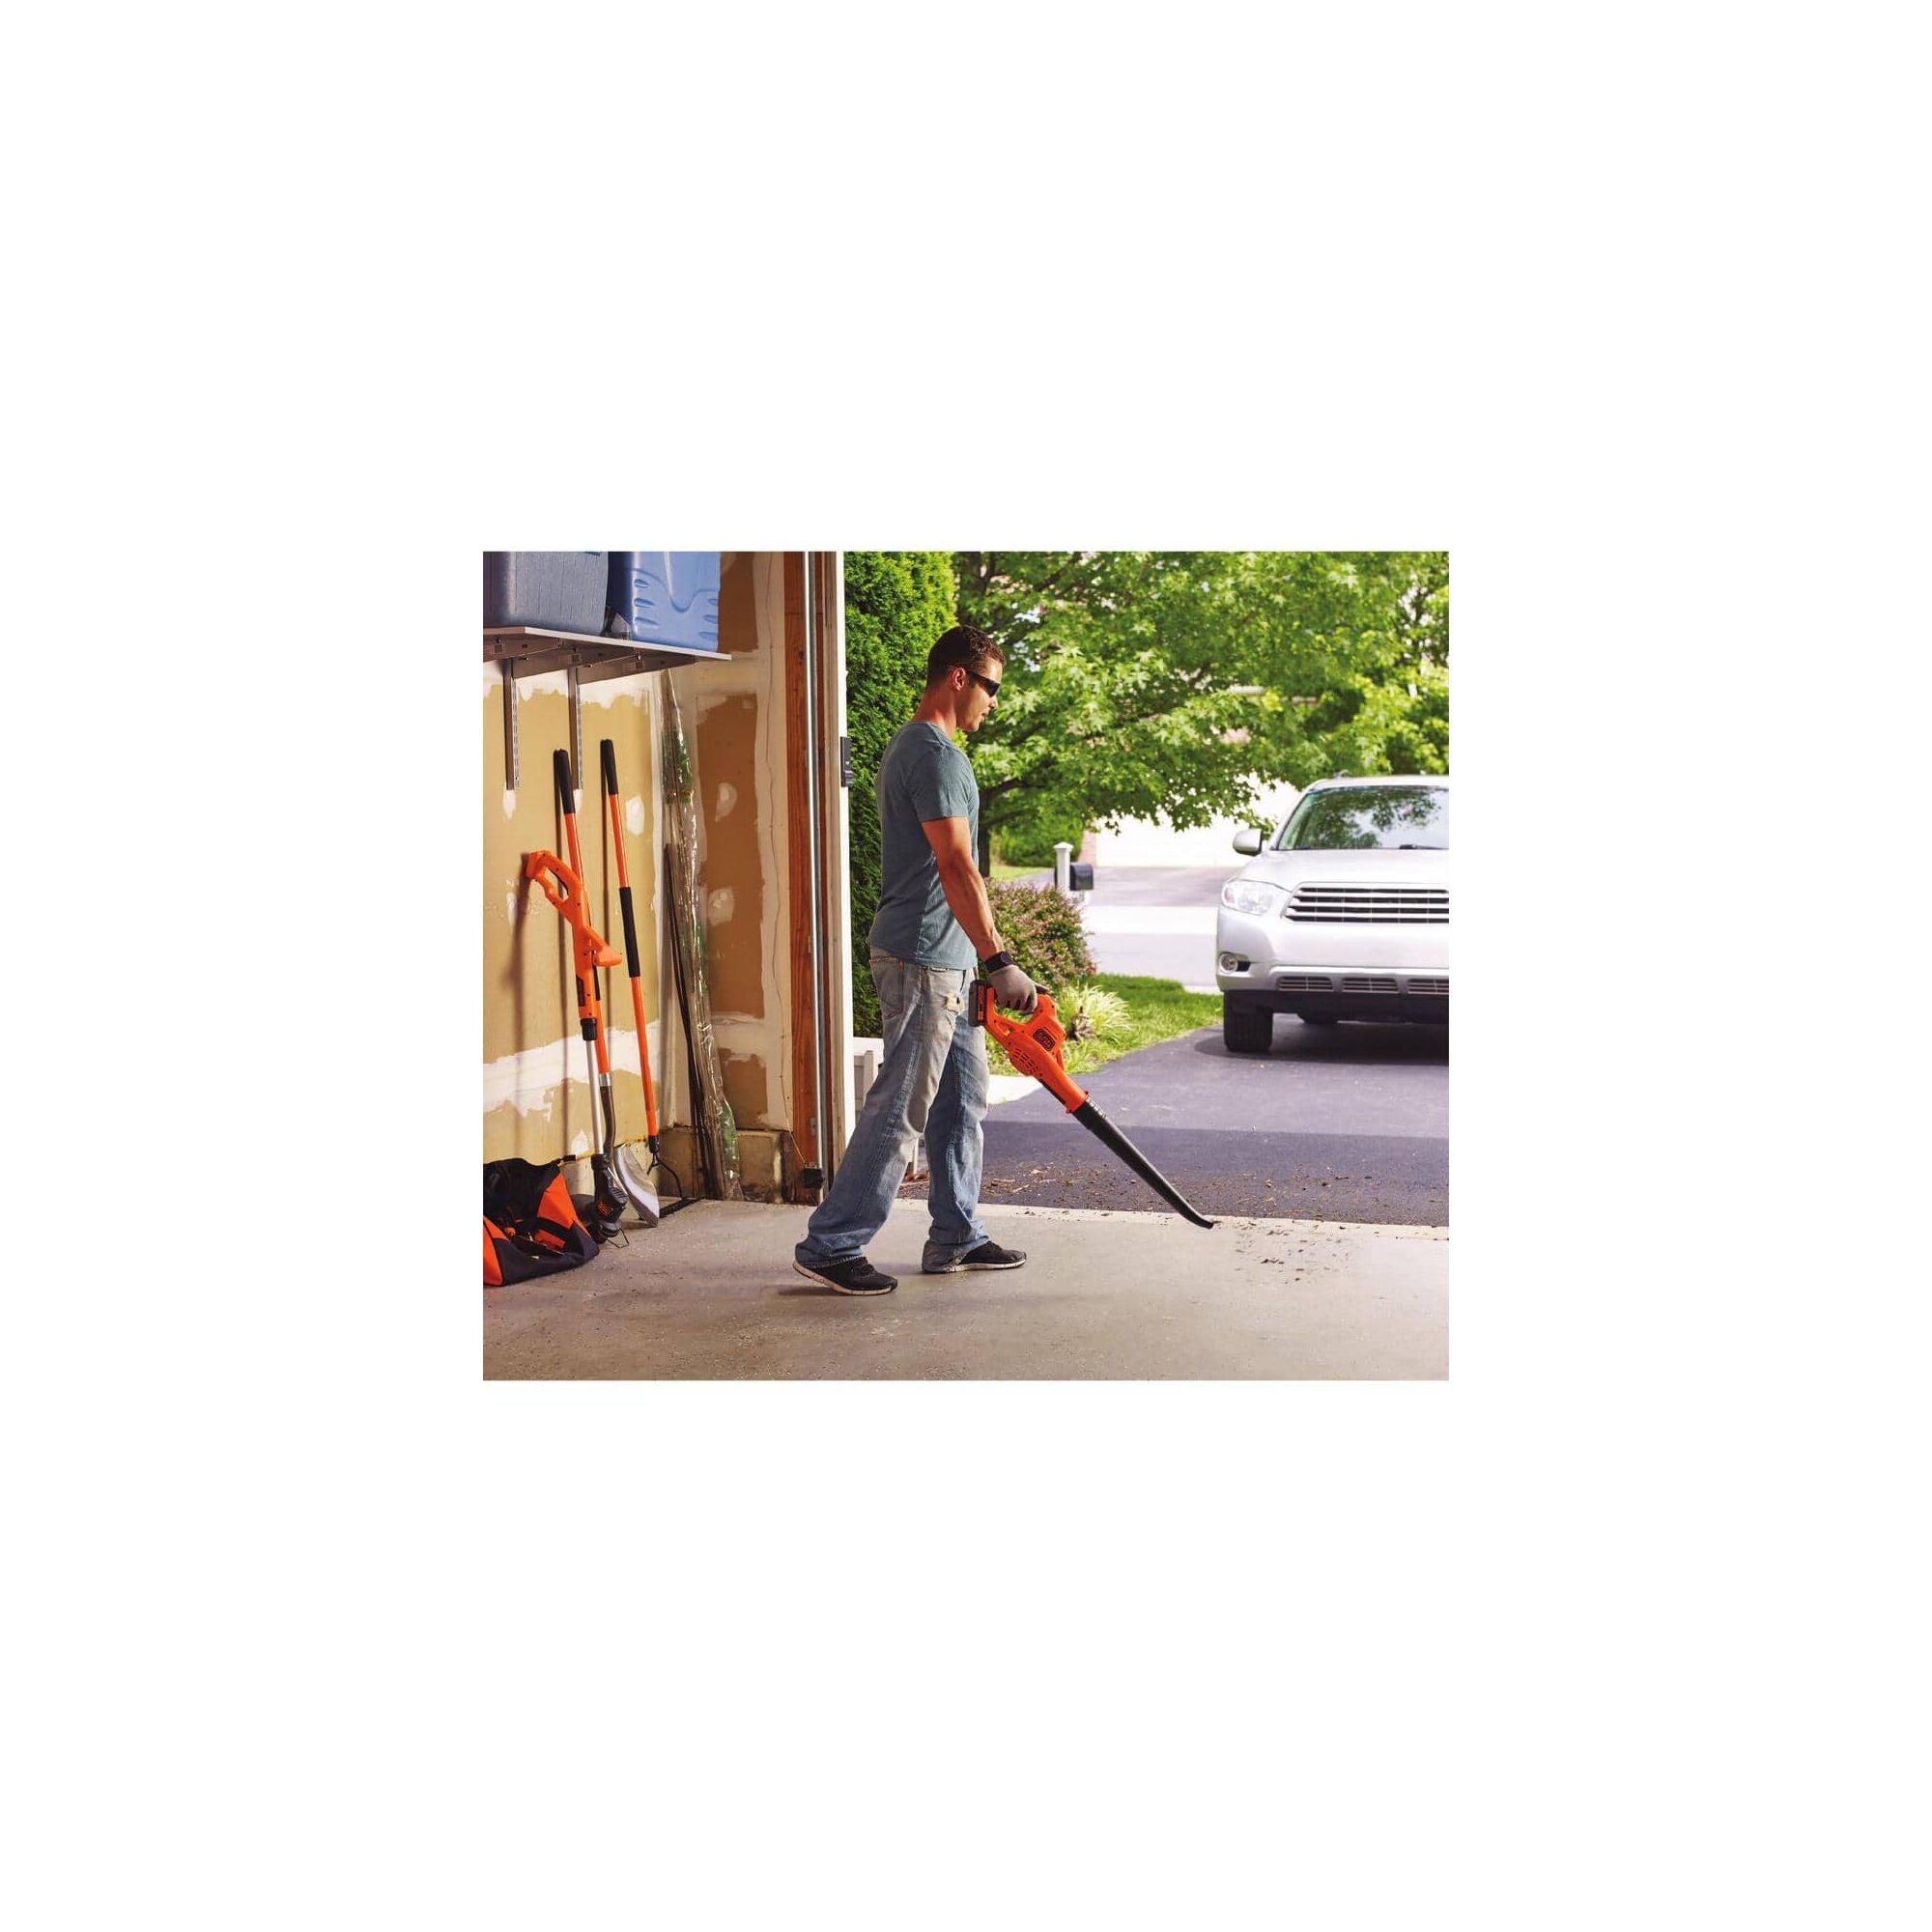 Black & Decker Lsw221 20v Max Lithium-ion Cordless Sweeper Kit (1.5 Ah) :  Target